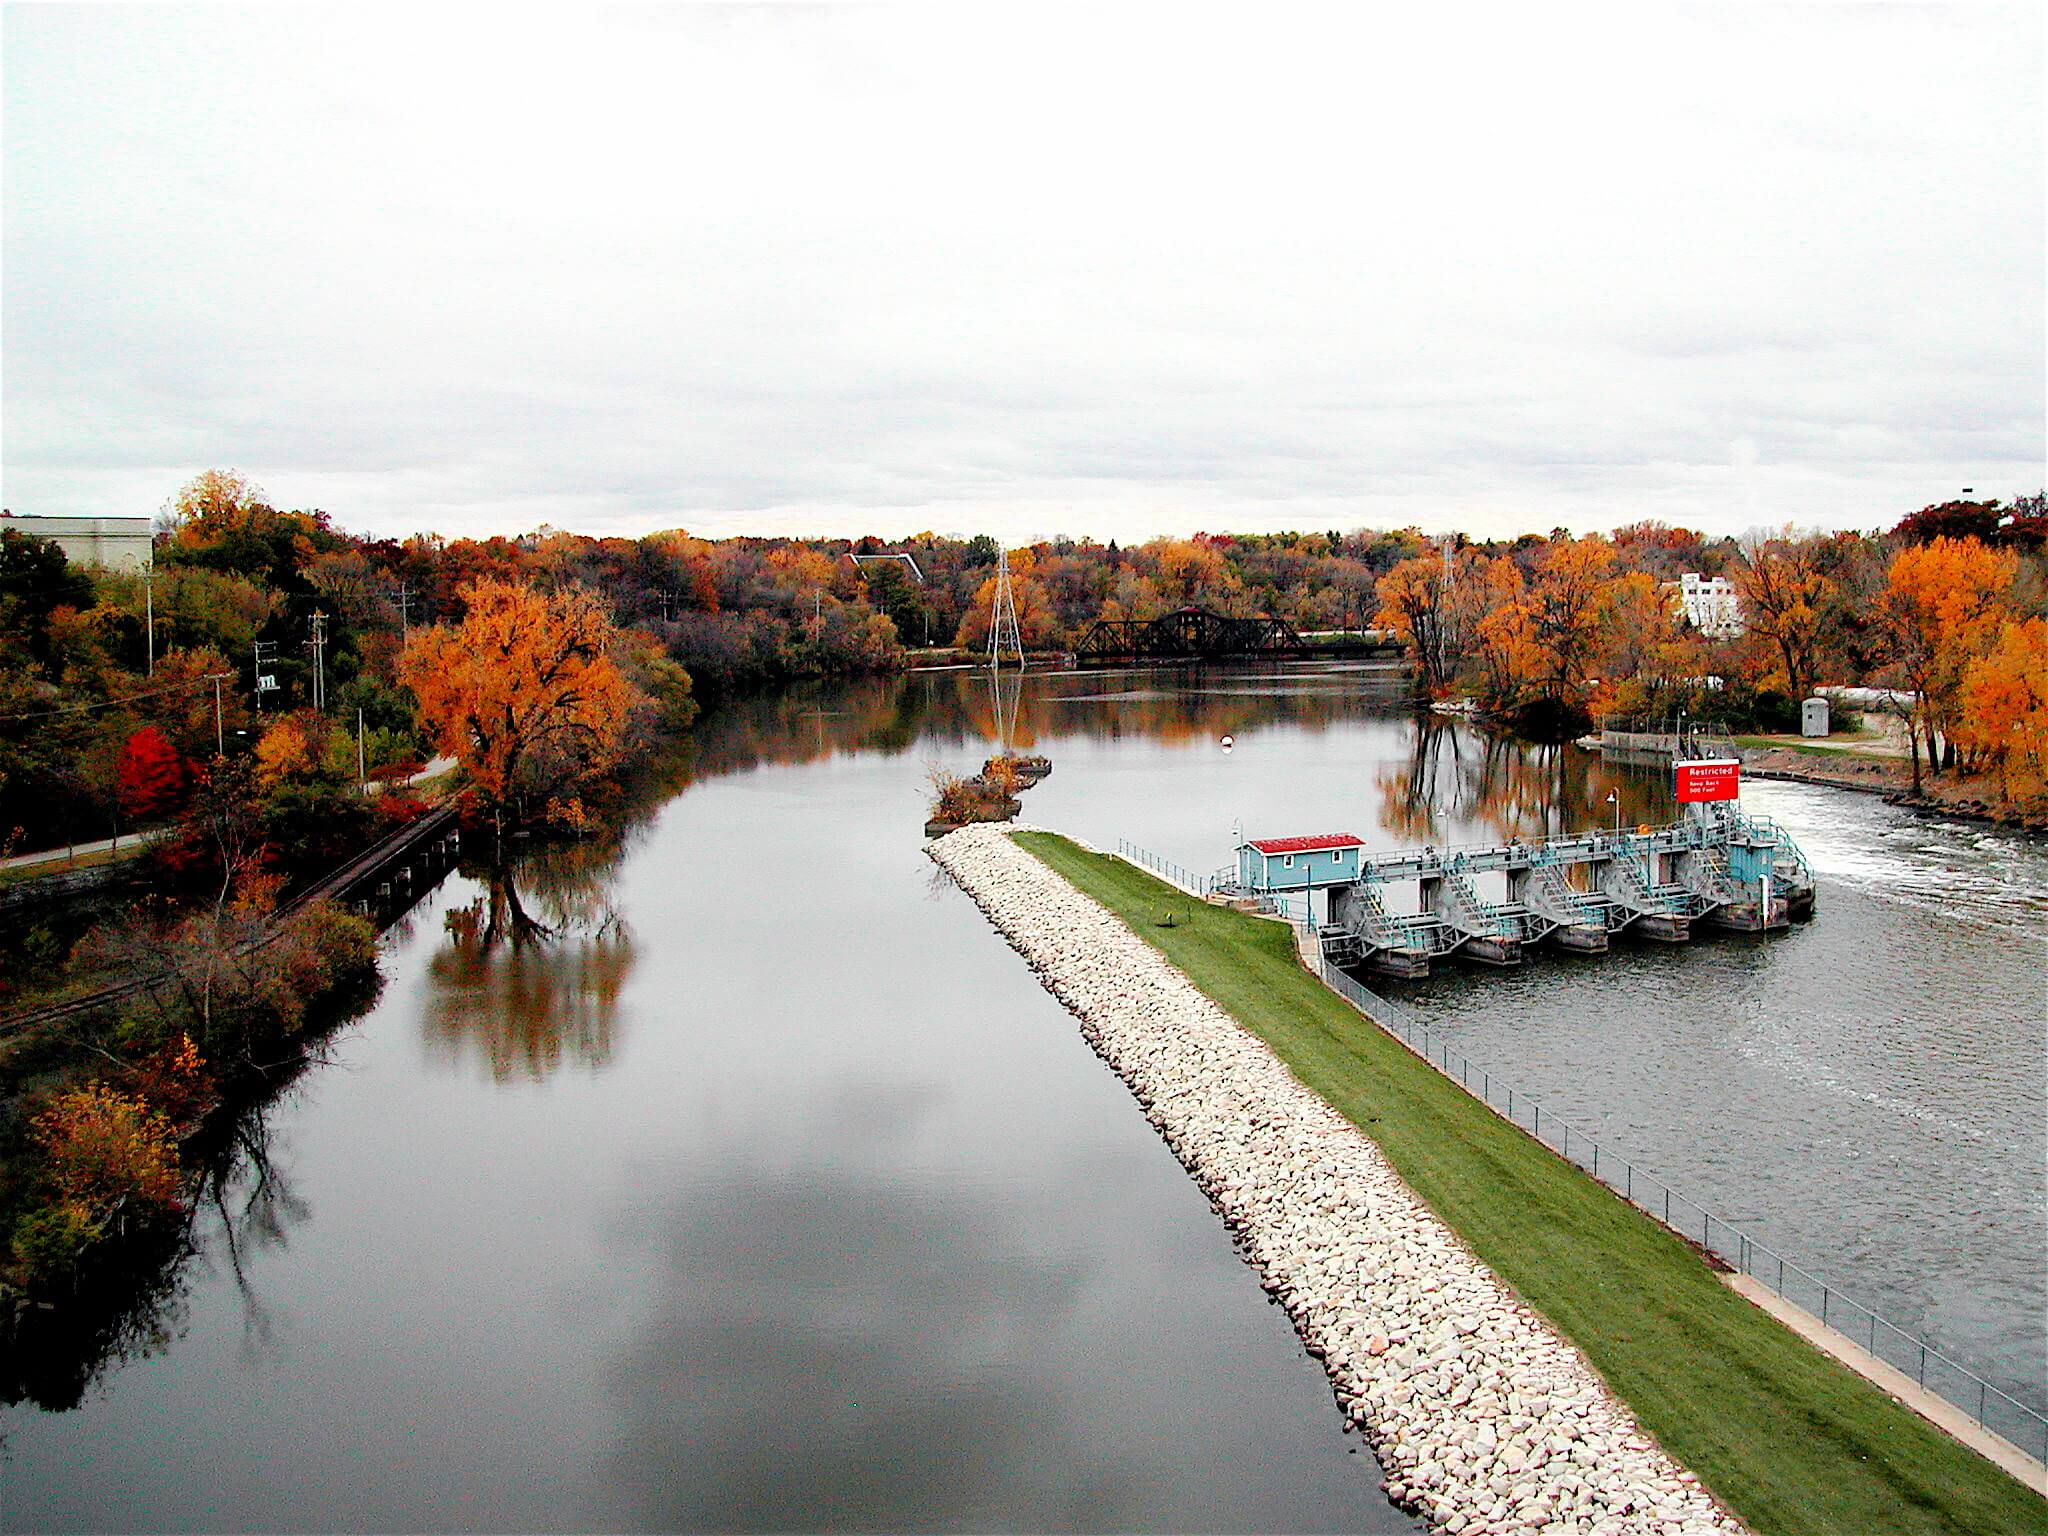 Fox River in Appleton, Wisconsin in the fall with a small manmade peninsula surrounded by trees changing color.